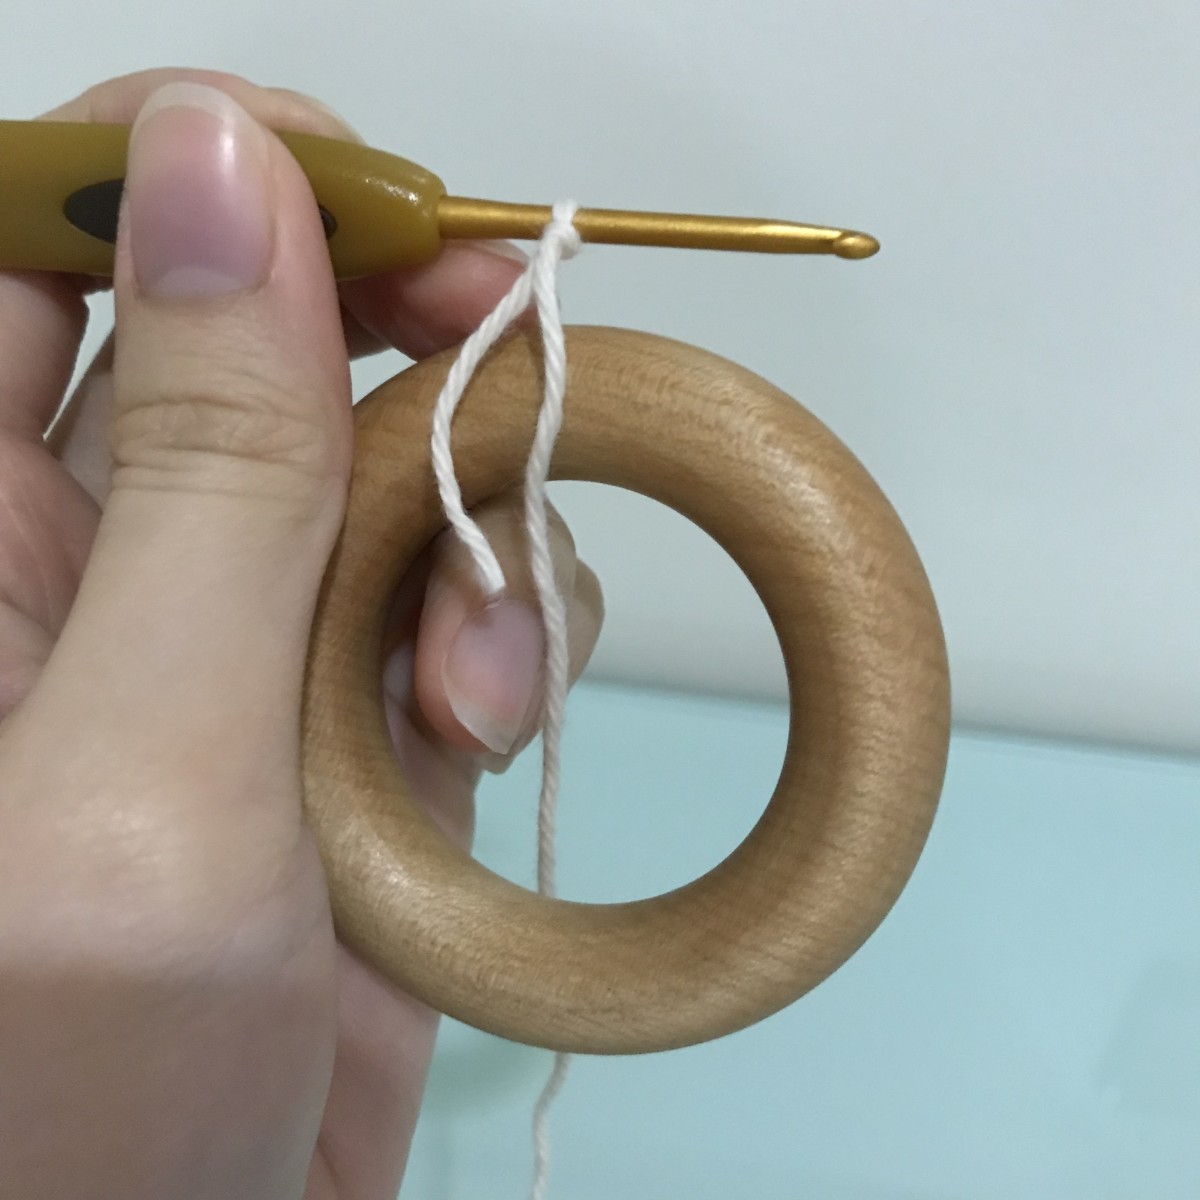 Pull the hook above the ring to start working the stitches.